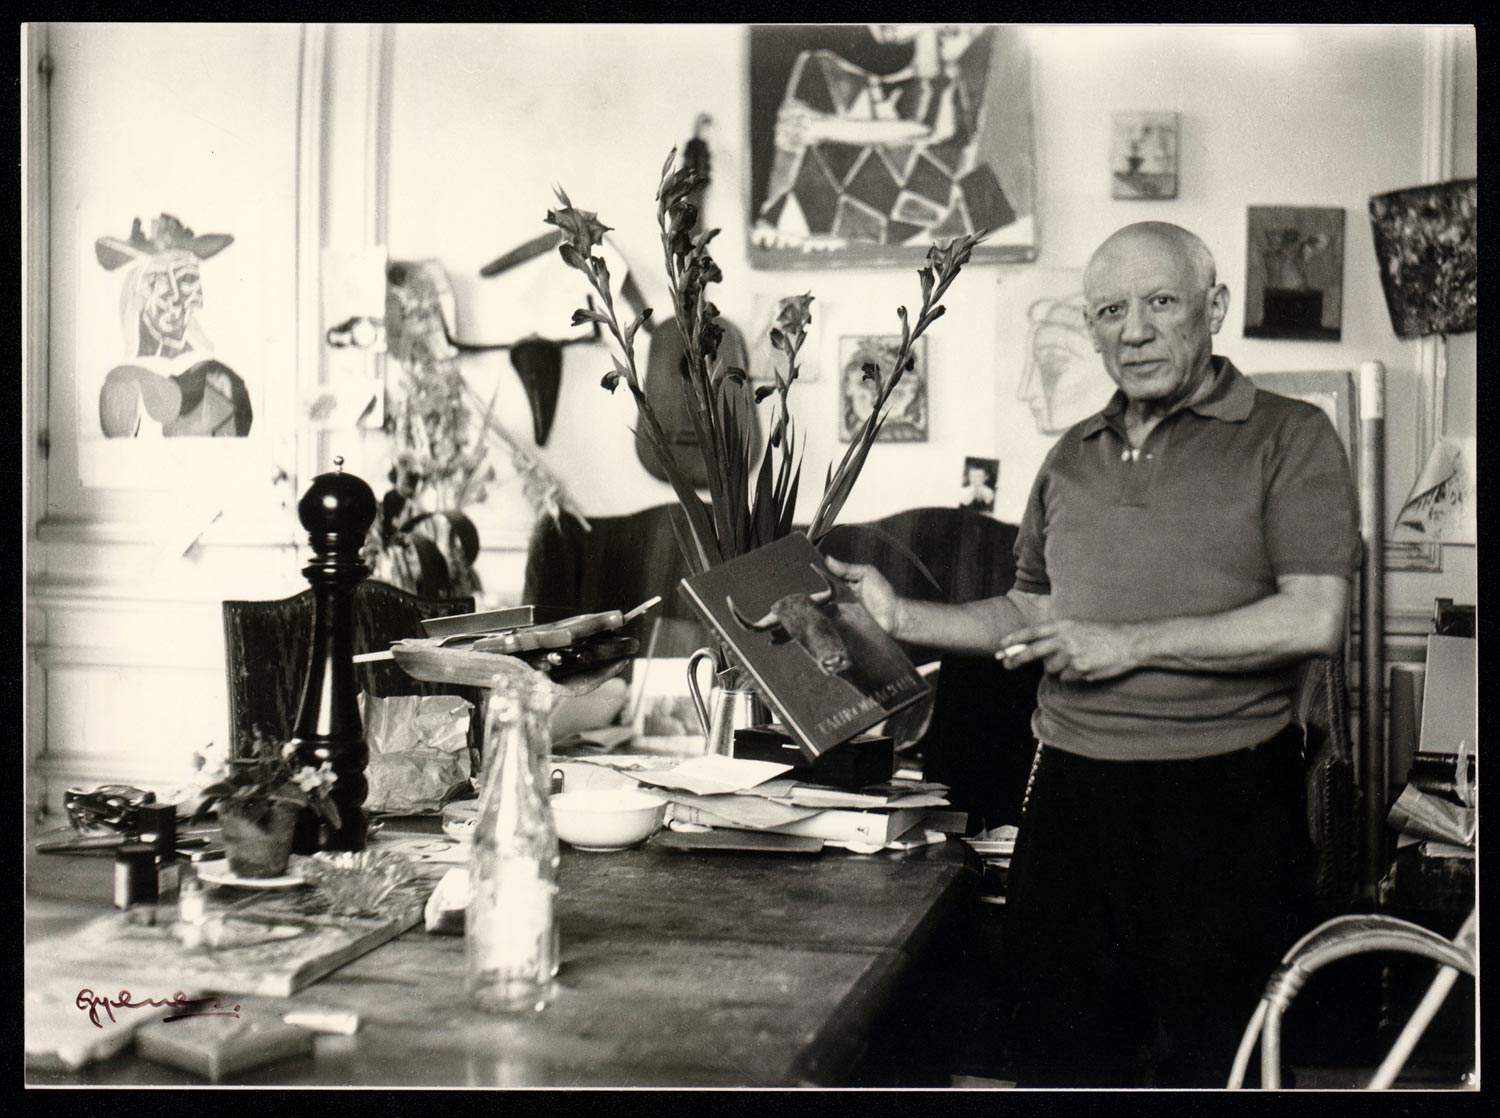 An exhibition on Picasso in Sarzana on the 50th anniversary of his death